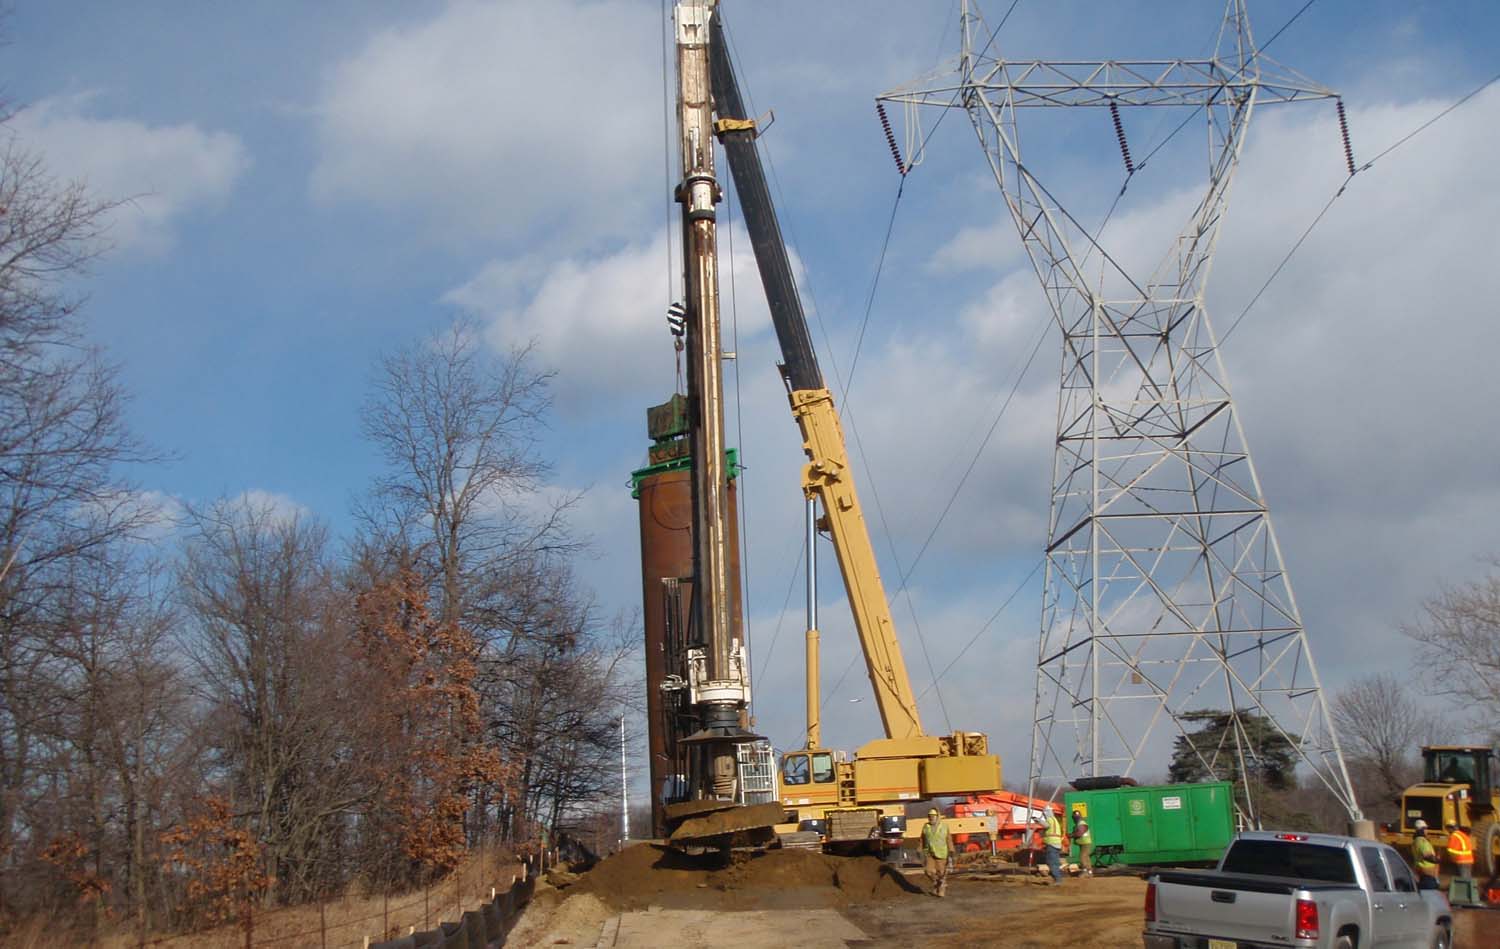 Foundation Structures is a drilling company in Philadelphia specializing in caissons, foundation drilling, drilled piers, drilled shafts, and drilled holes.